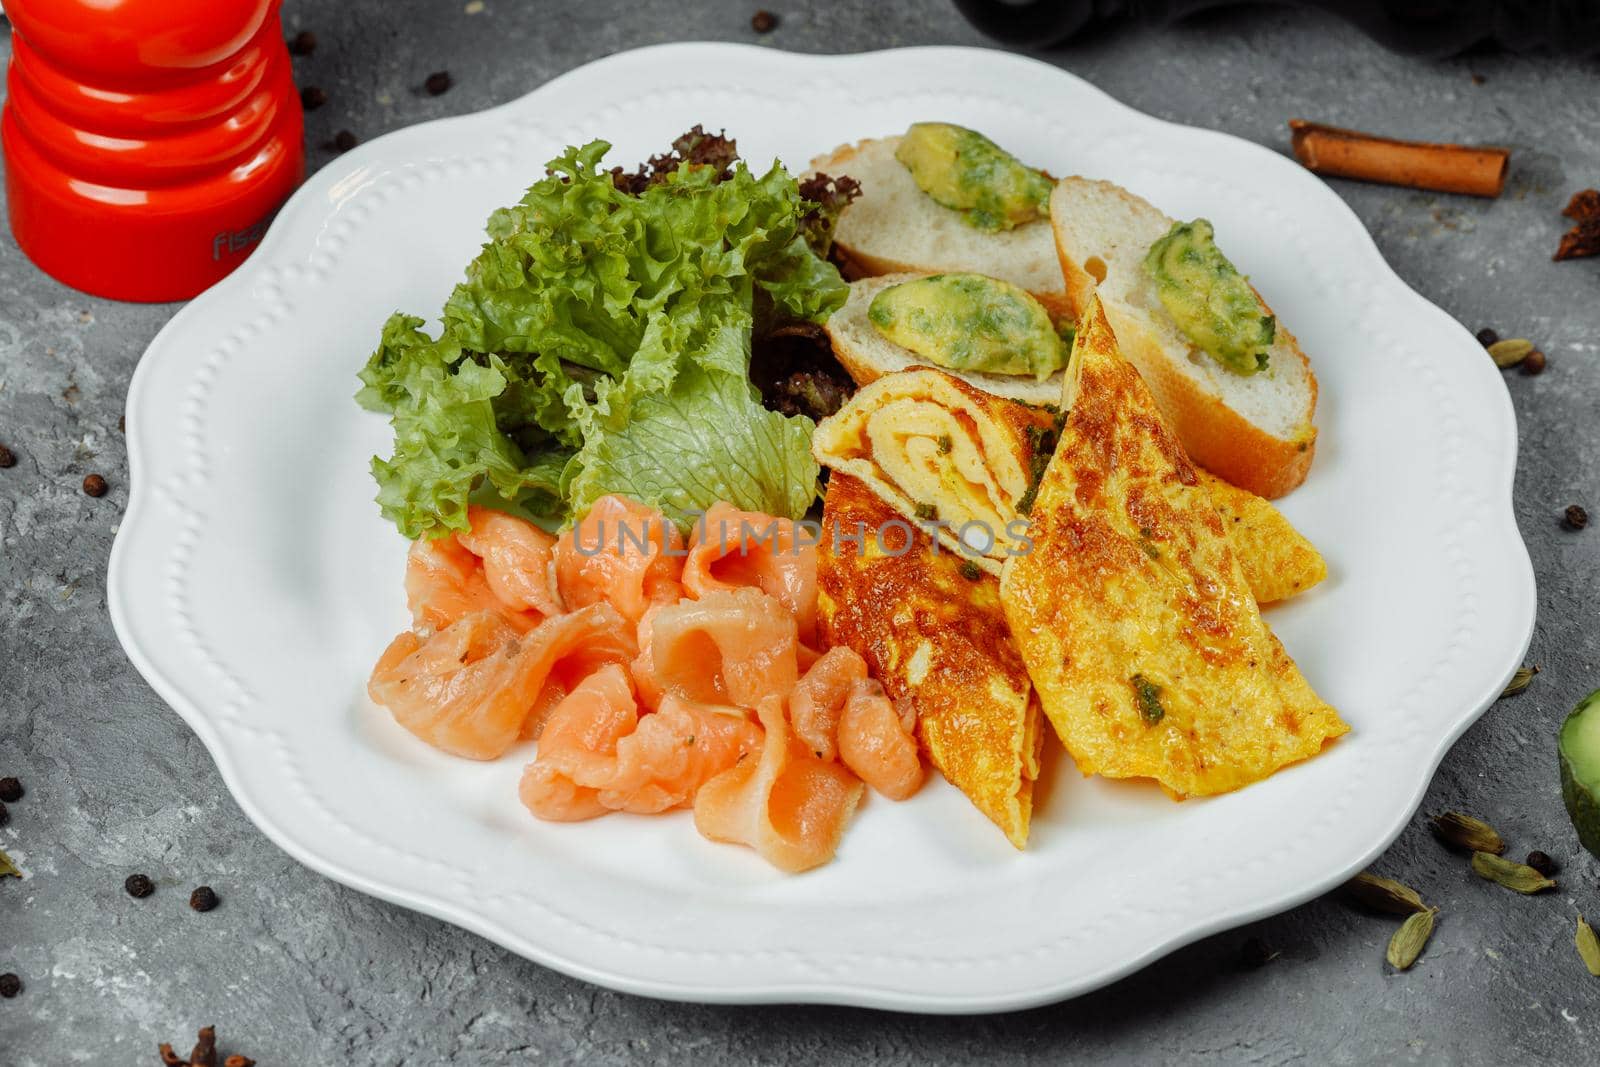 omelet with red fish and vegetables, beautiful serving by UcheaD